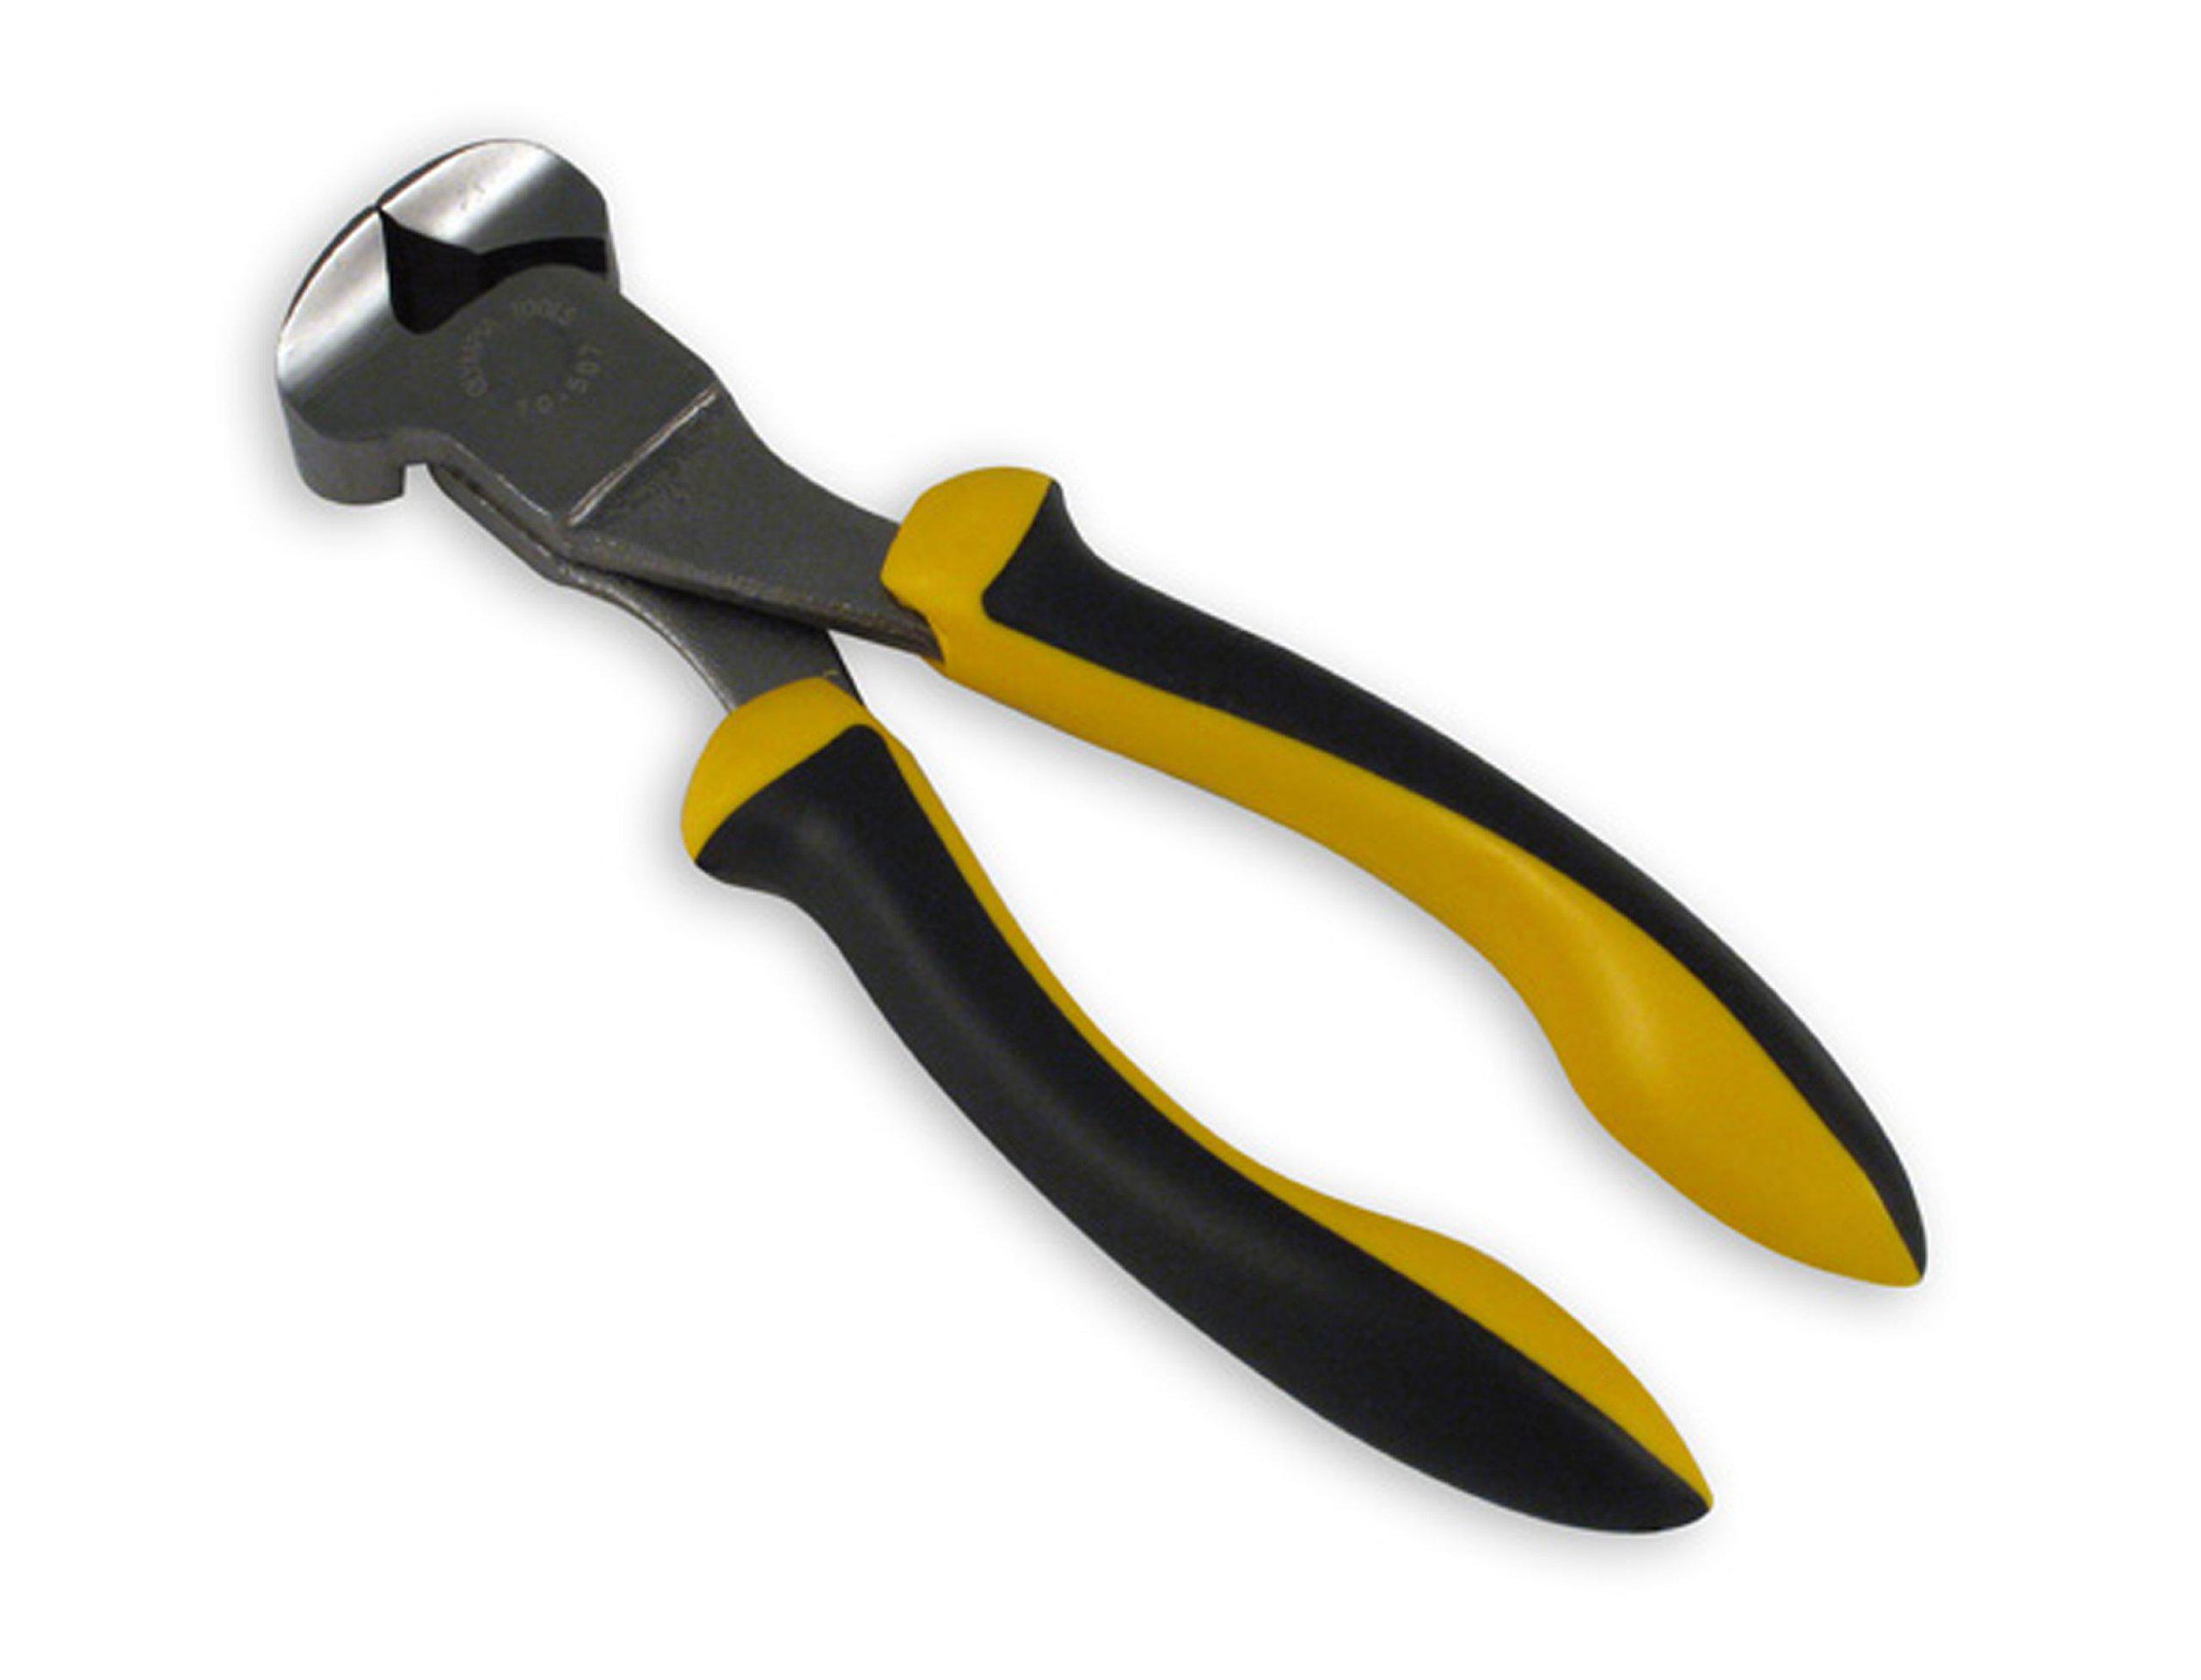 olympia tools end nipper 10-507, 7 inches